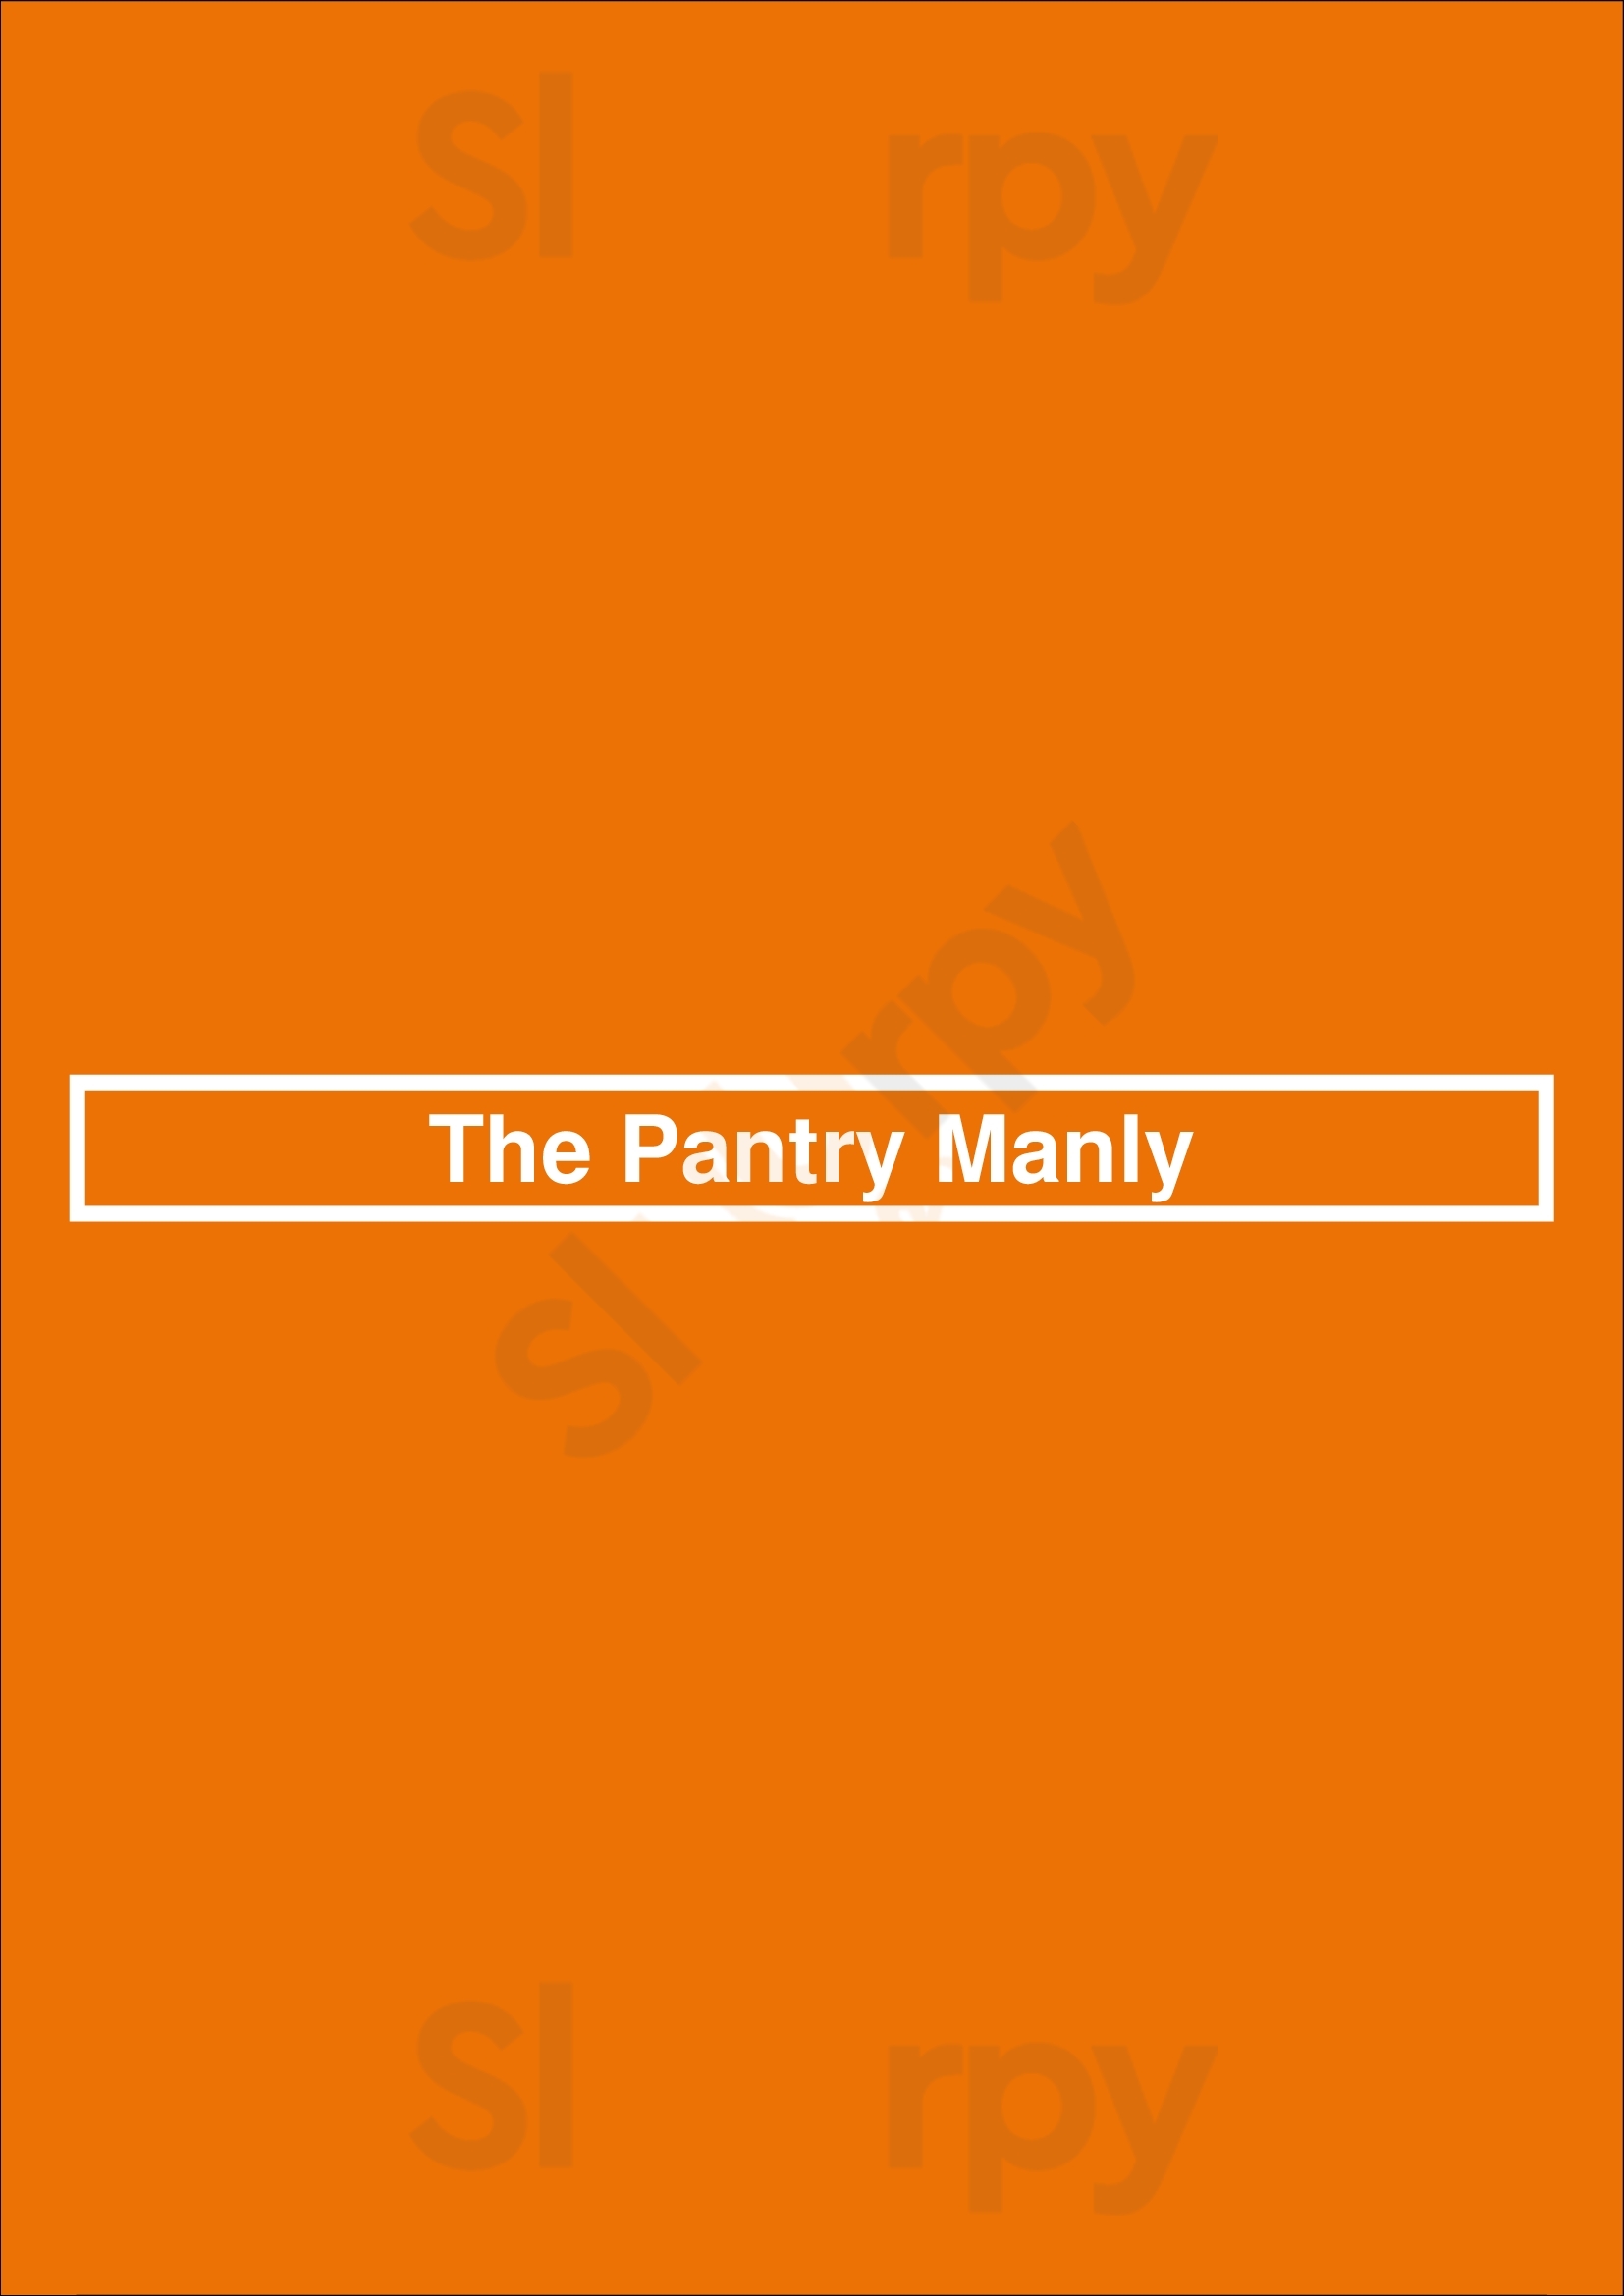 The Pantry Manly Manly Menu - 1